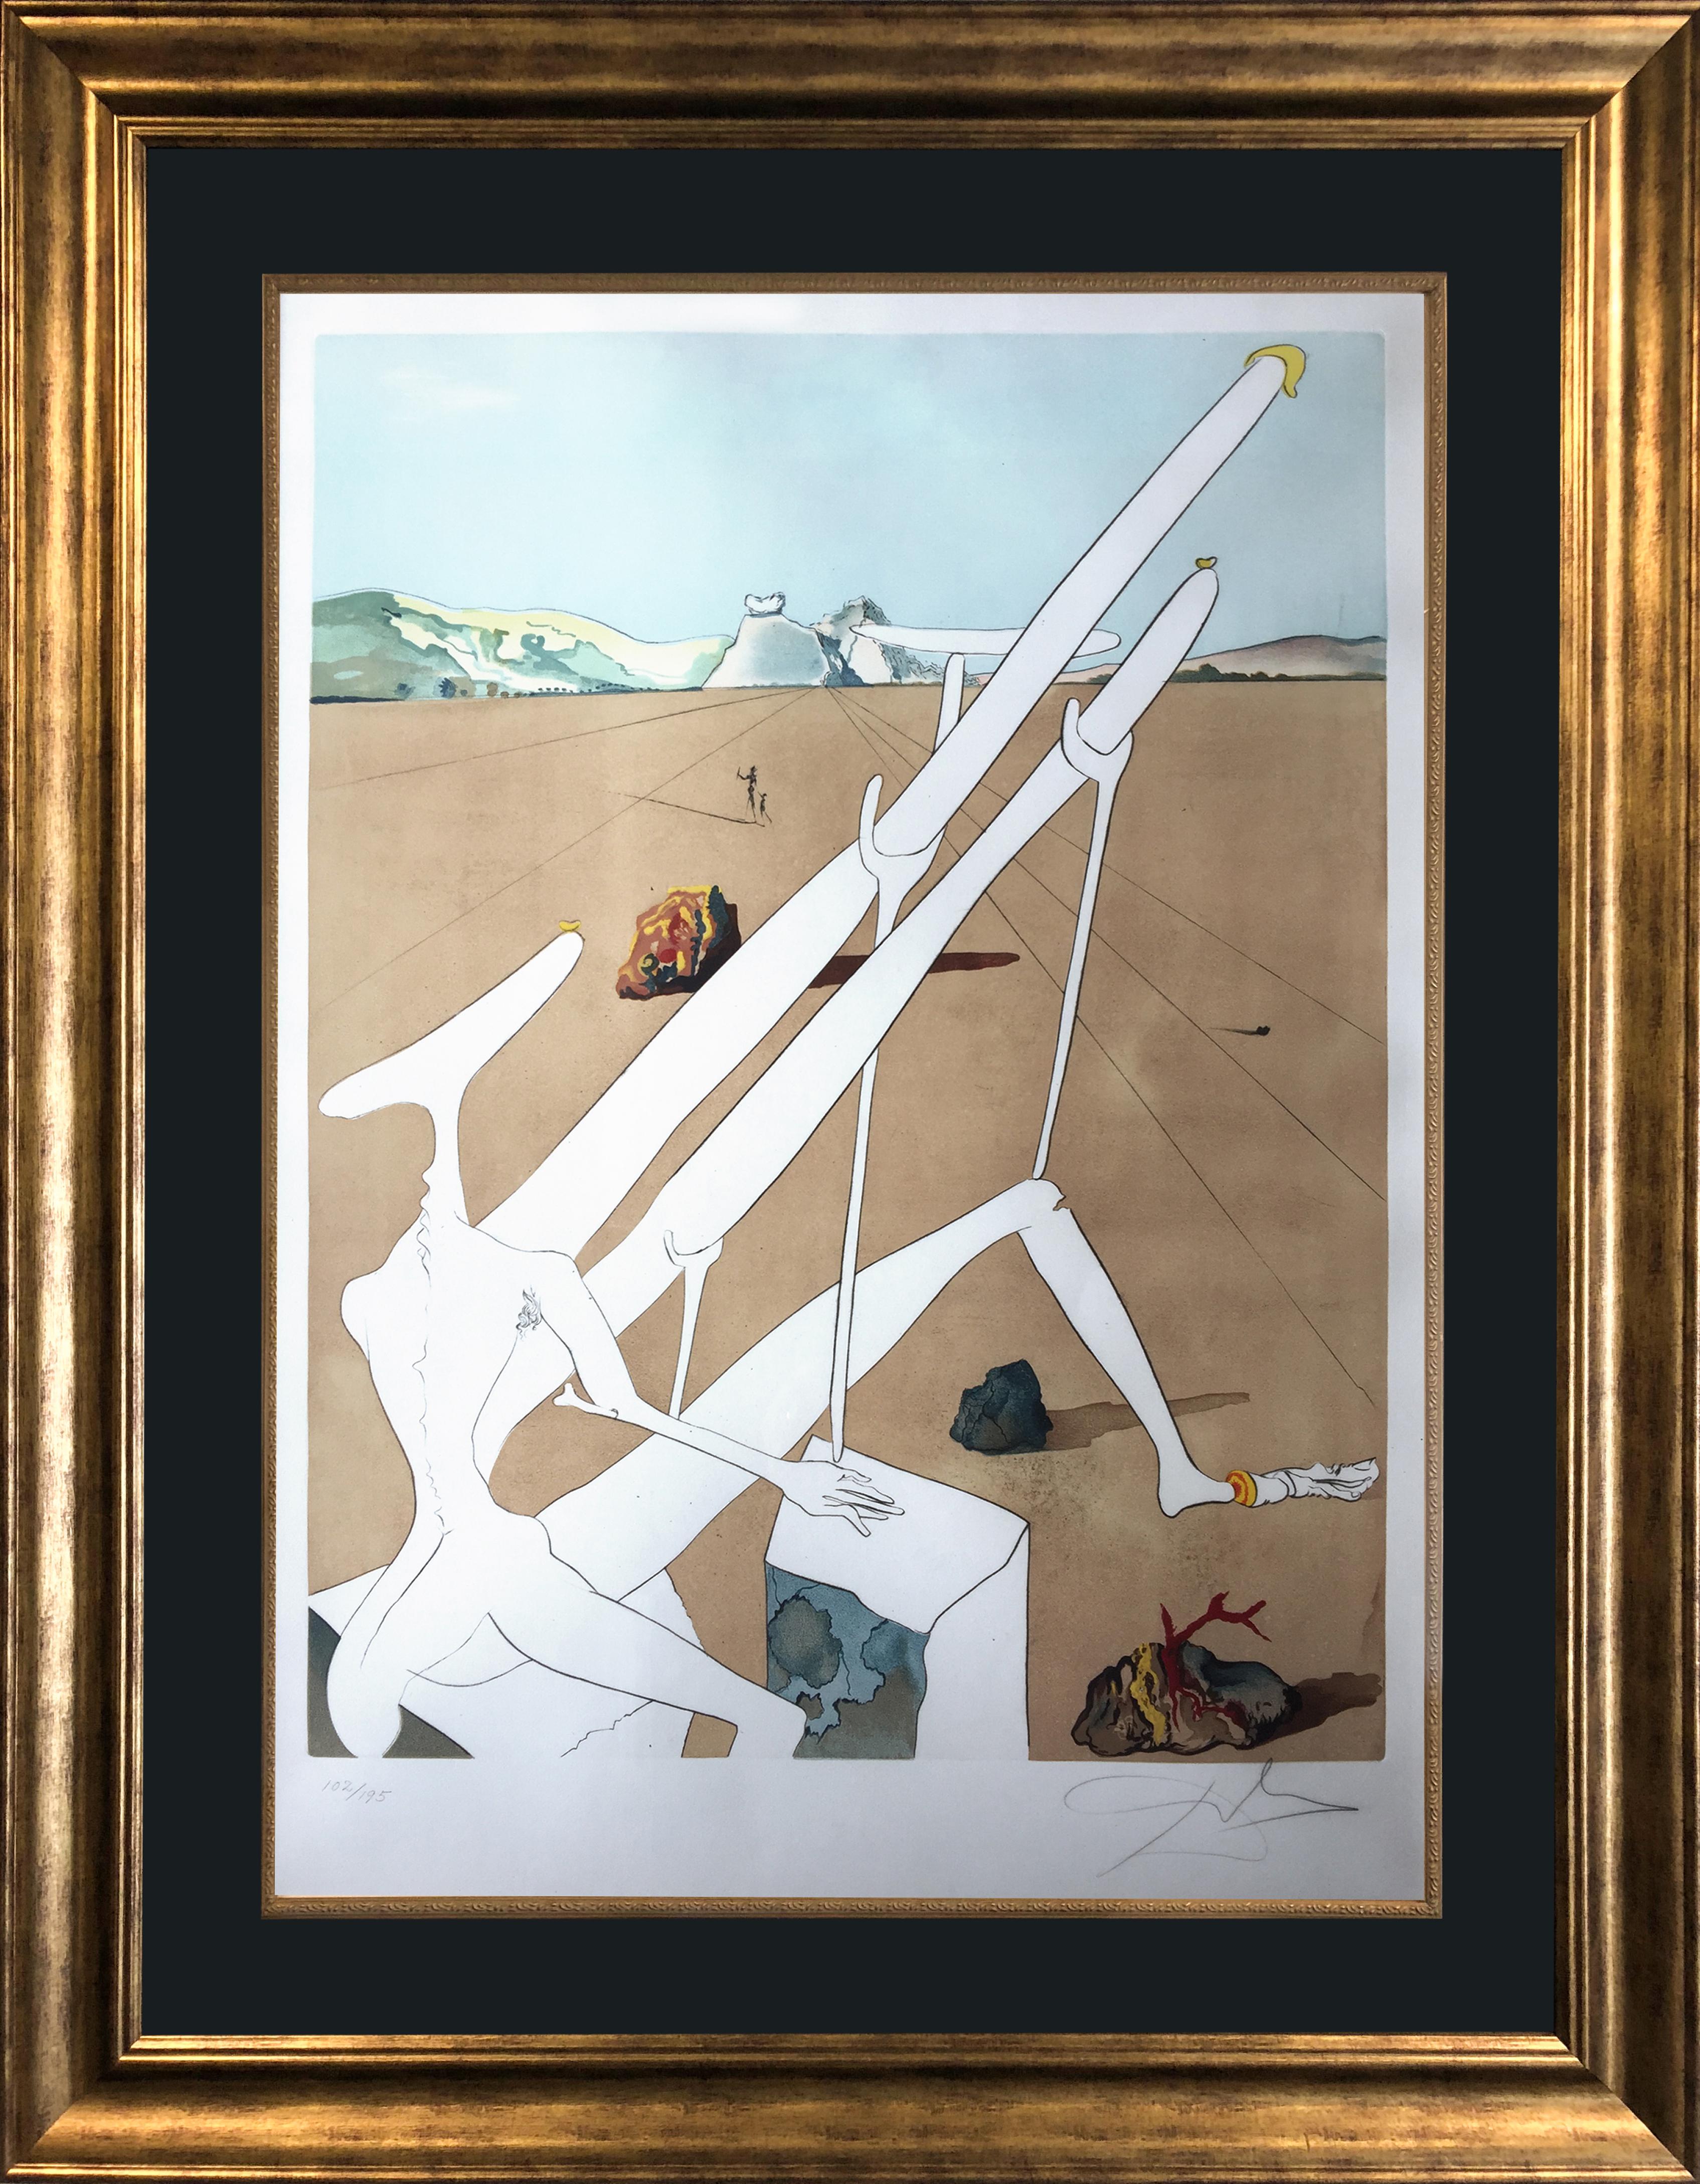 Martian Dali equipped with double holoelectronic microscope - Surrealism - Print by Salvador Dalí